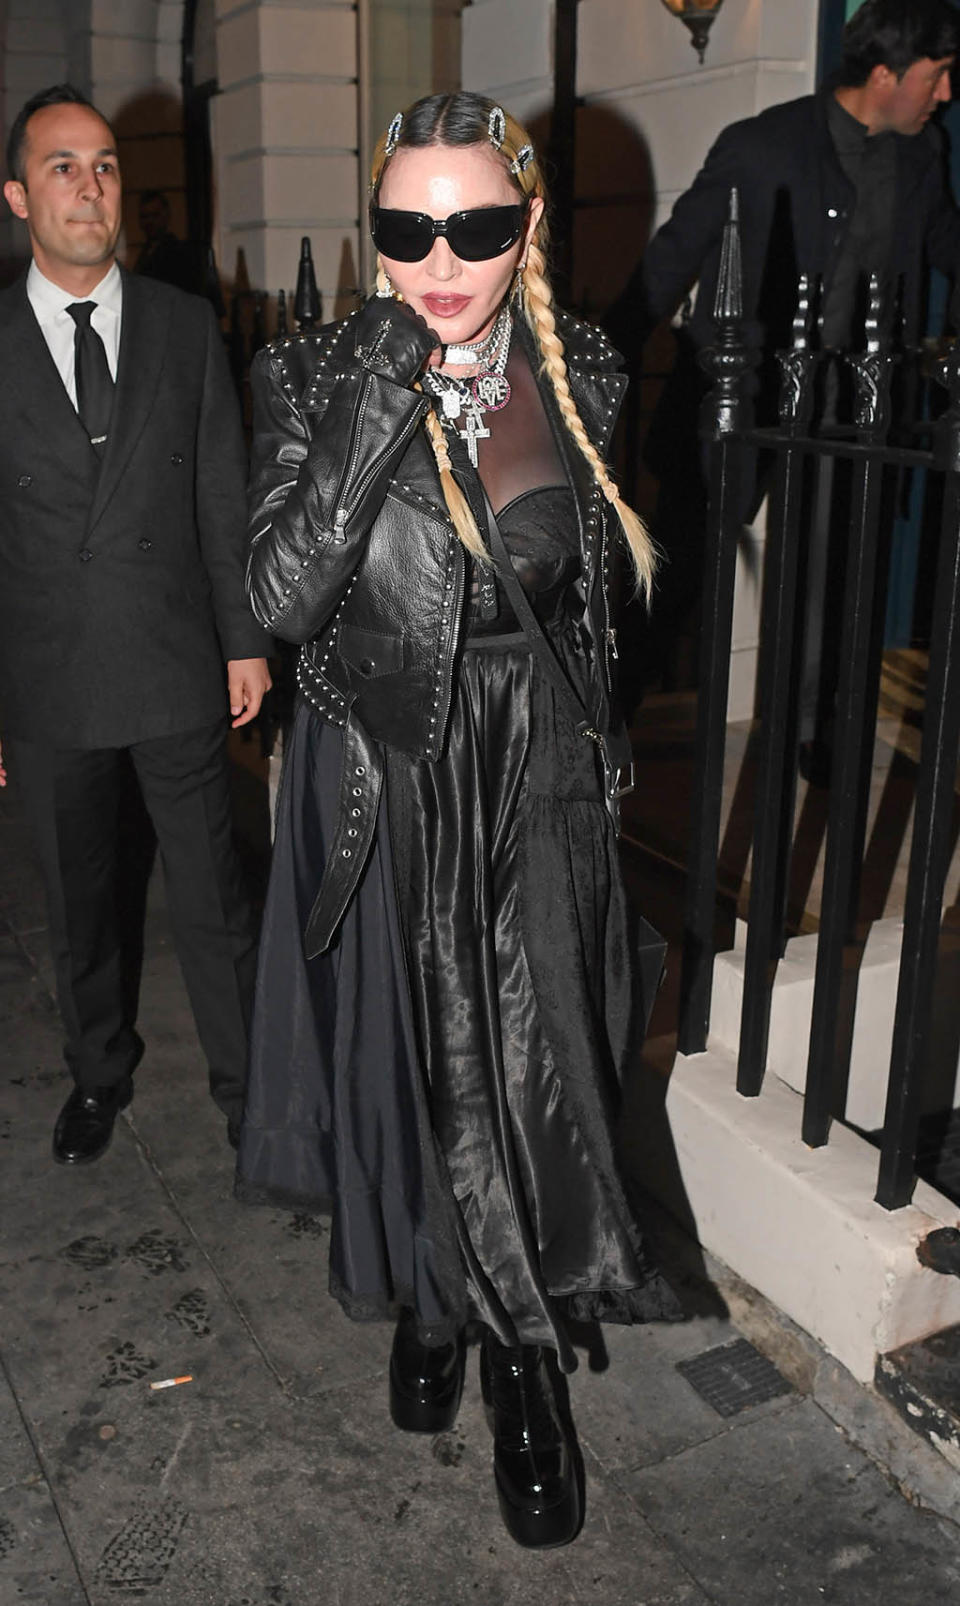 Madonna leaves Oswald’s Private Members Club in London on May 24, 2022. - Credit: SplashNews.com